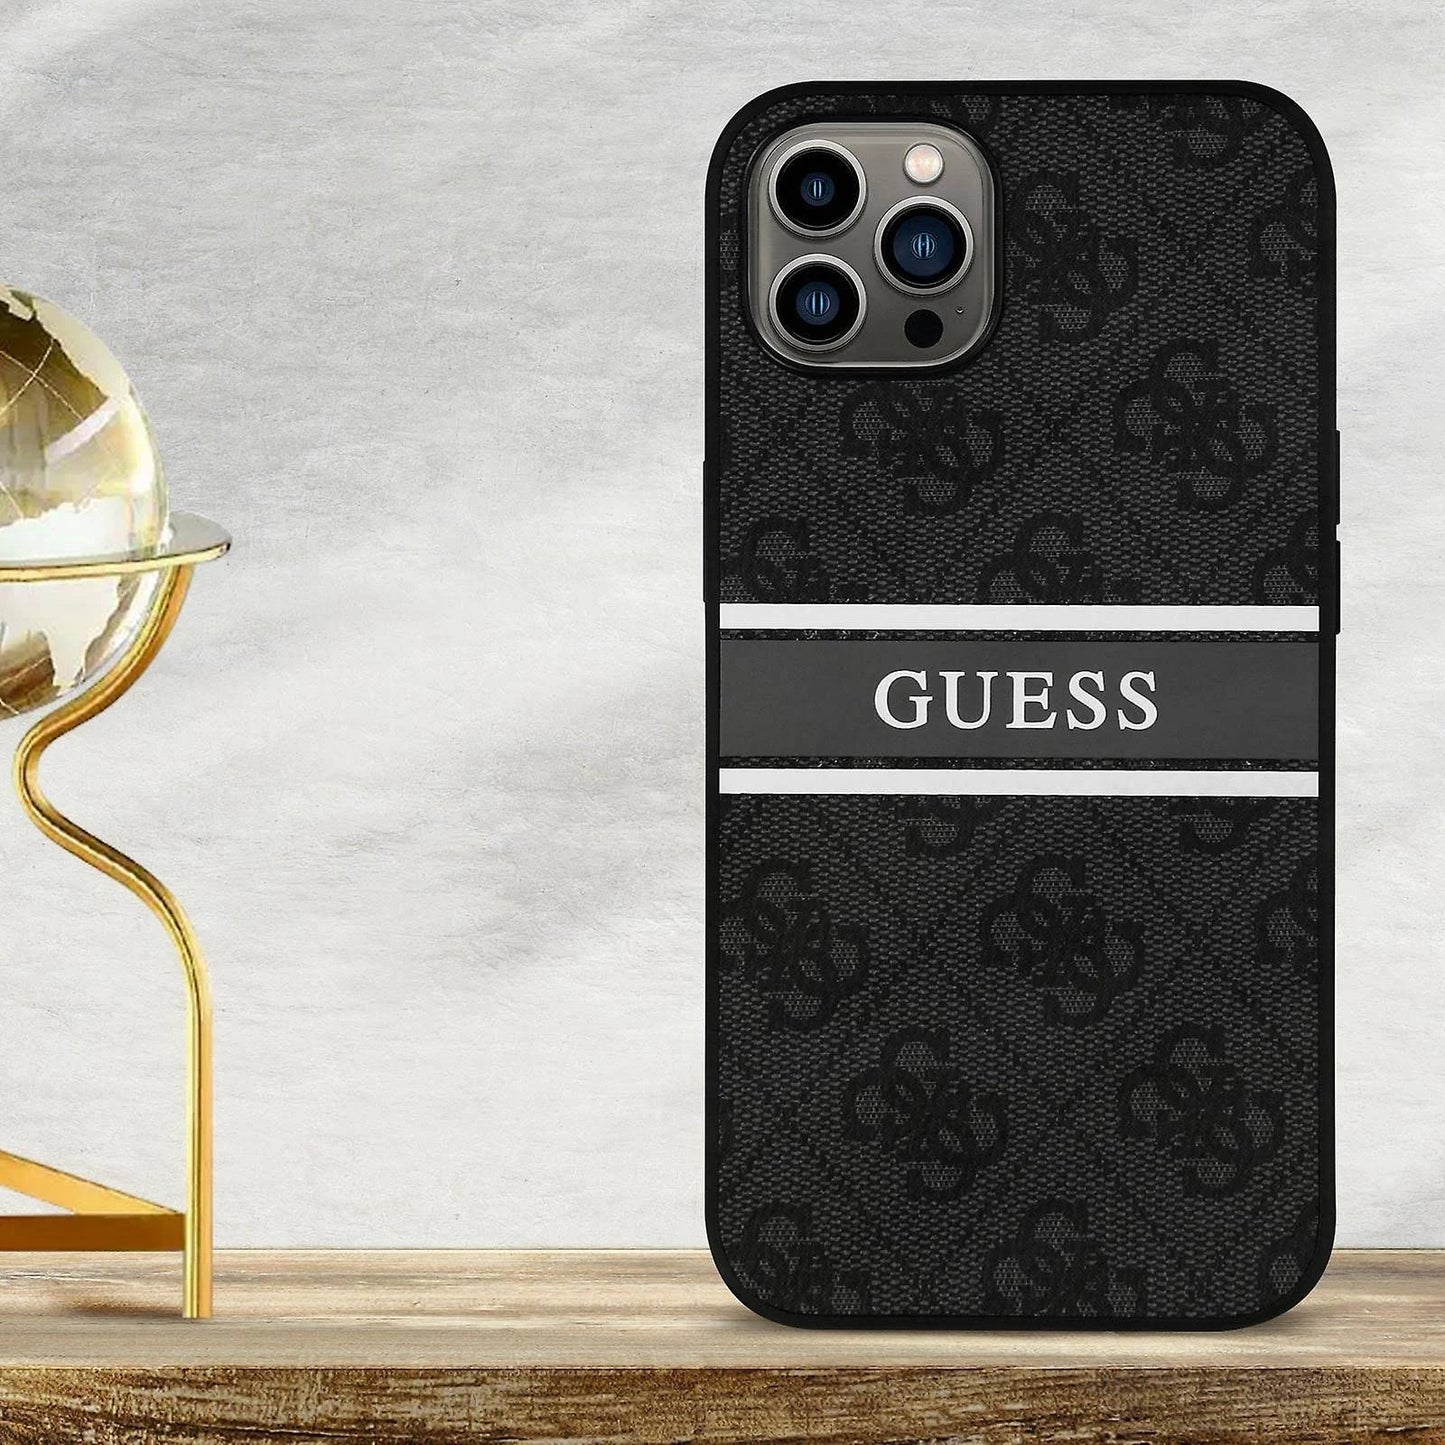 iPhone 13 LEATHER CASE GUESS PRINTED ALL OVER DESIGN - GUESS - GREY/BLACK